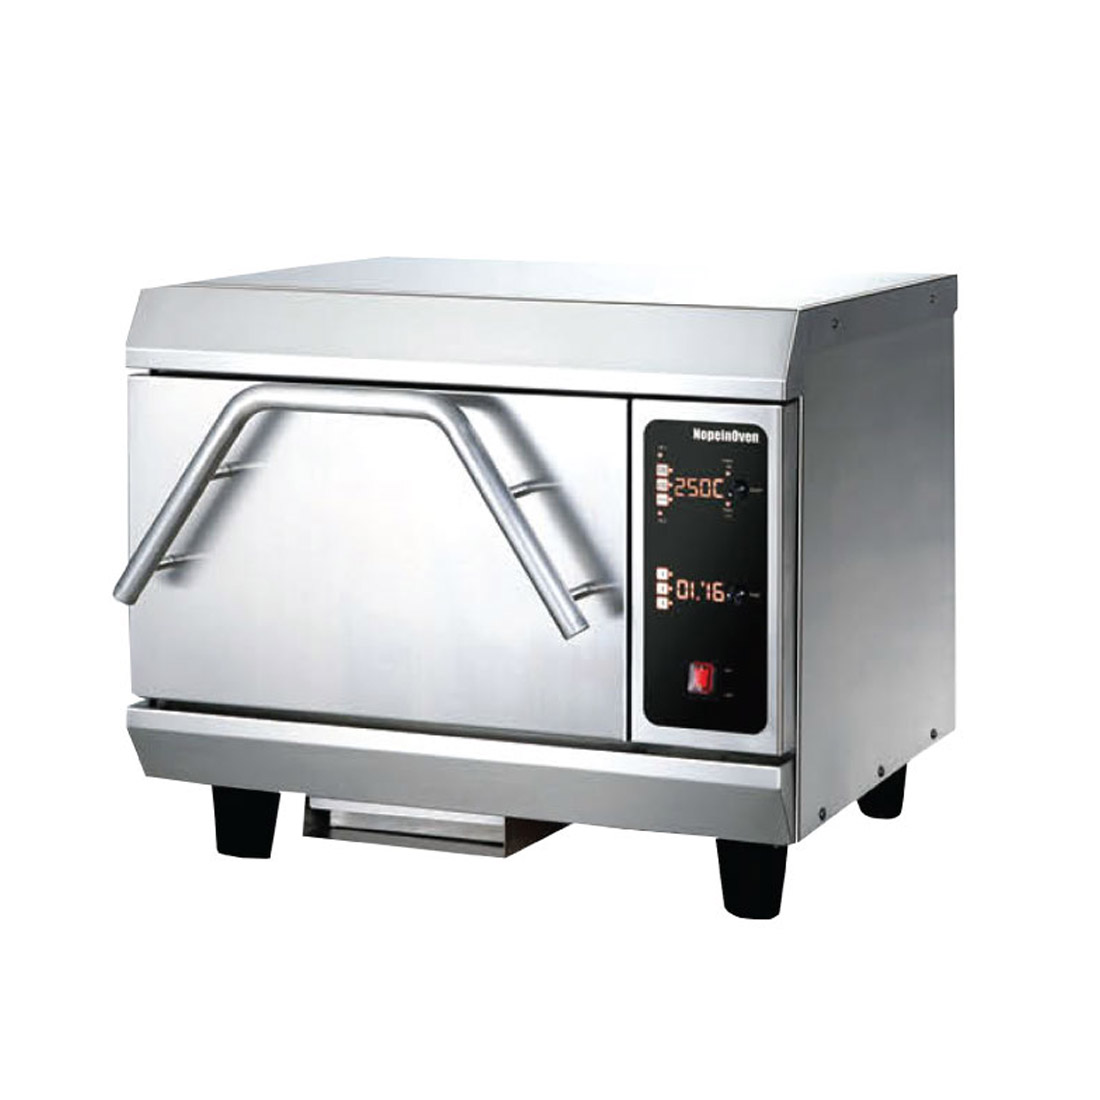 EXTREME-PRO Convection Microwave Oven